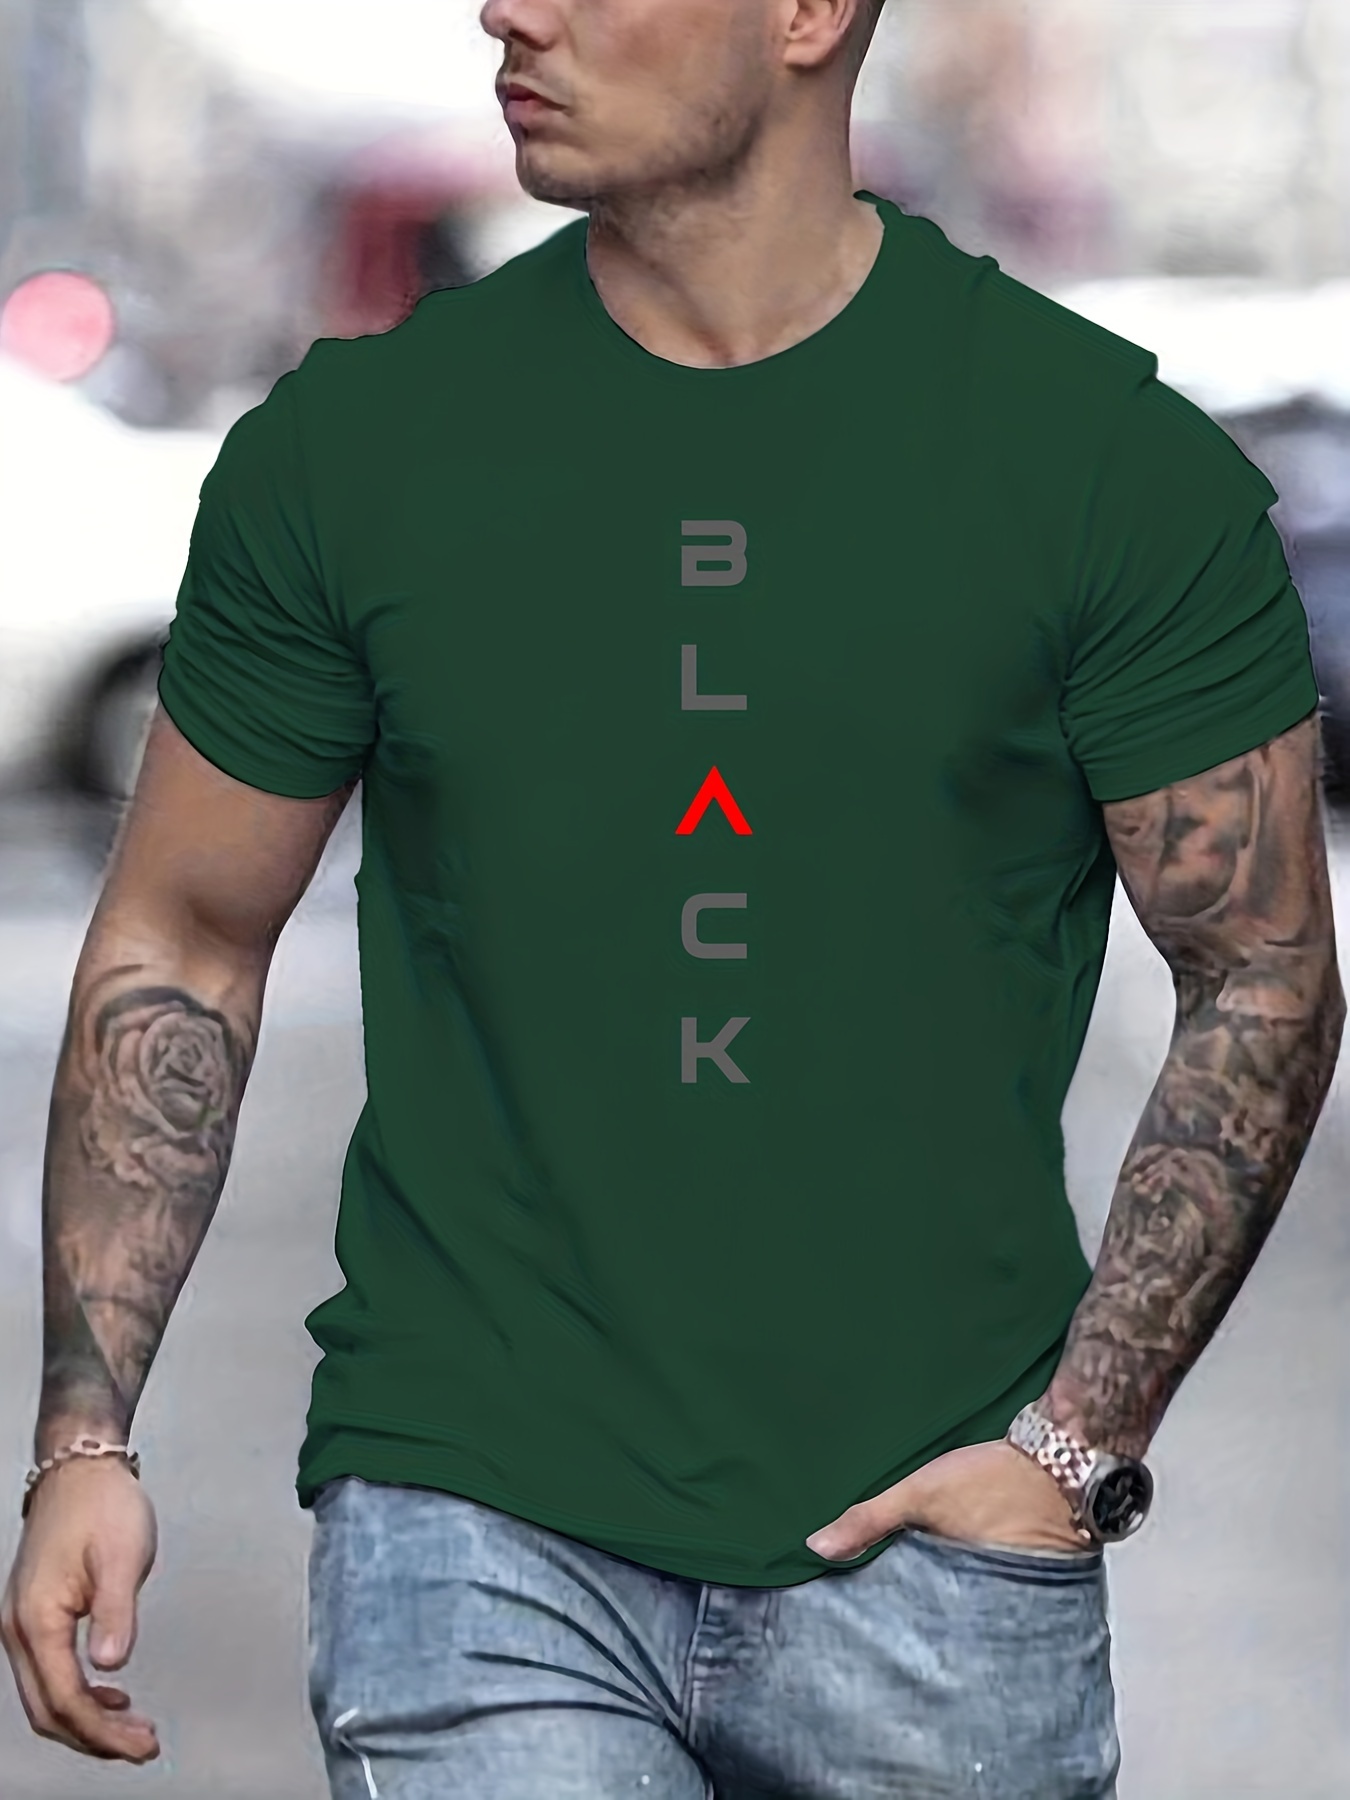 black print tee shirt tee for men casual short sleeve t shirt for summer spring fall tops as gifts details 15